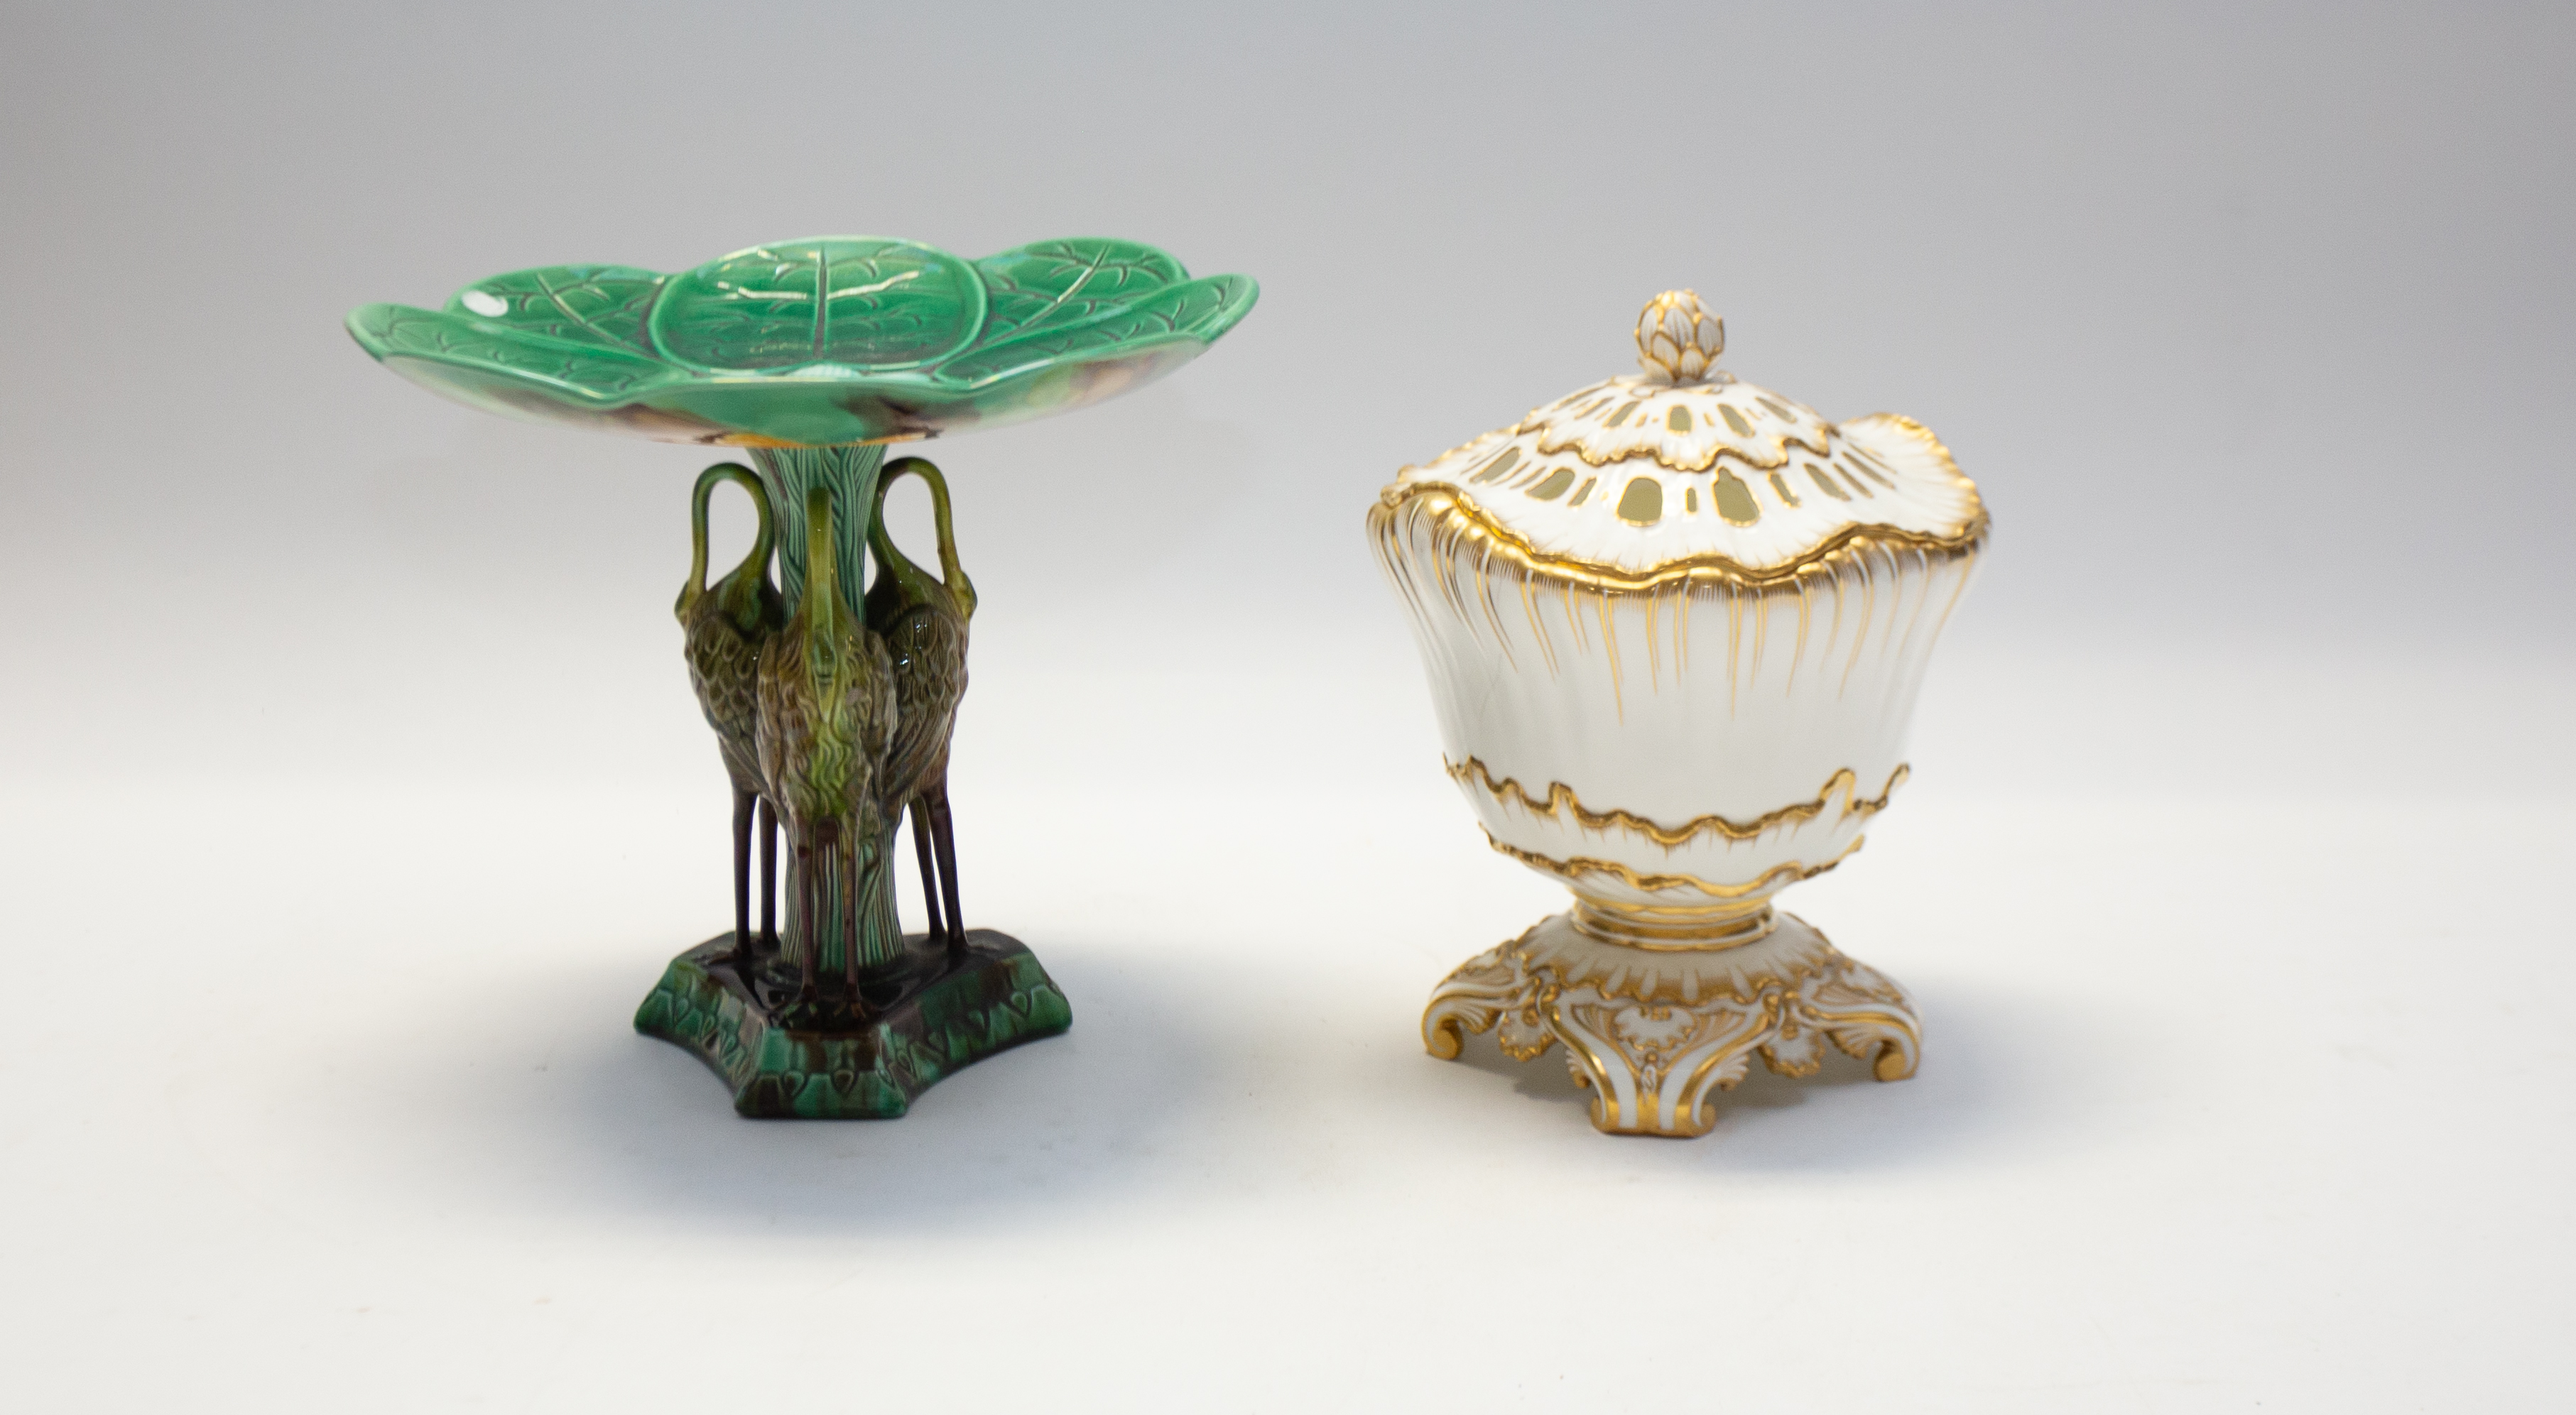 Majolica 19th century table comport with stork detail support along with Minton rose petal lidded